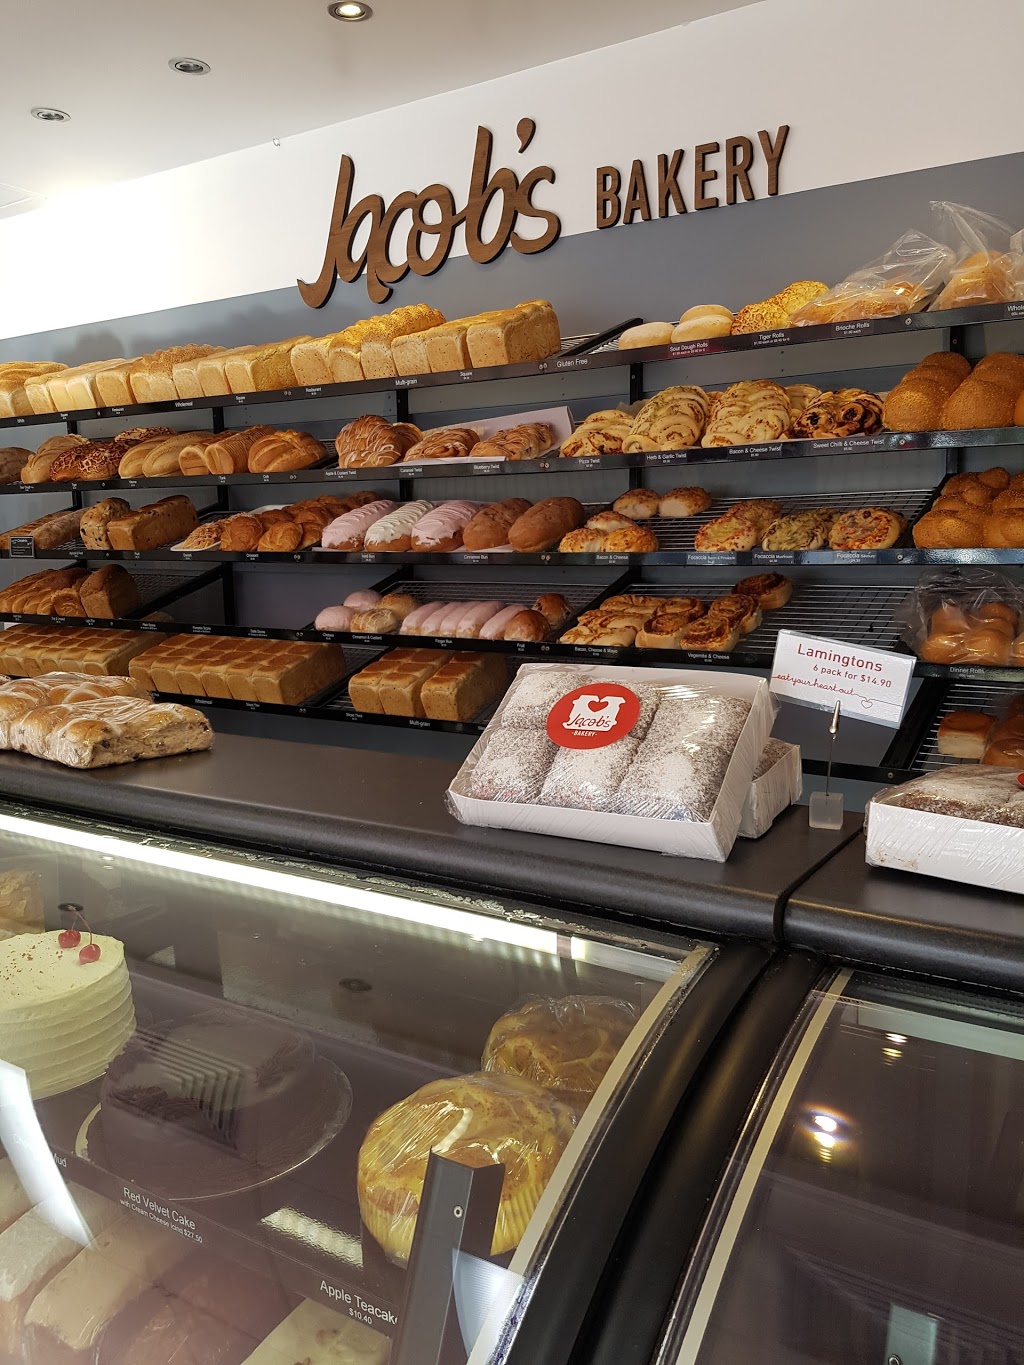 Jacobs Bakery | bakery | 1754 Gympie Rd, Carseldine QLD 4034, Australia | 0738634144 OR +61 7 3863 4144